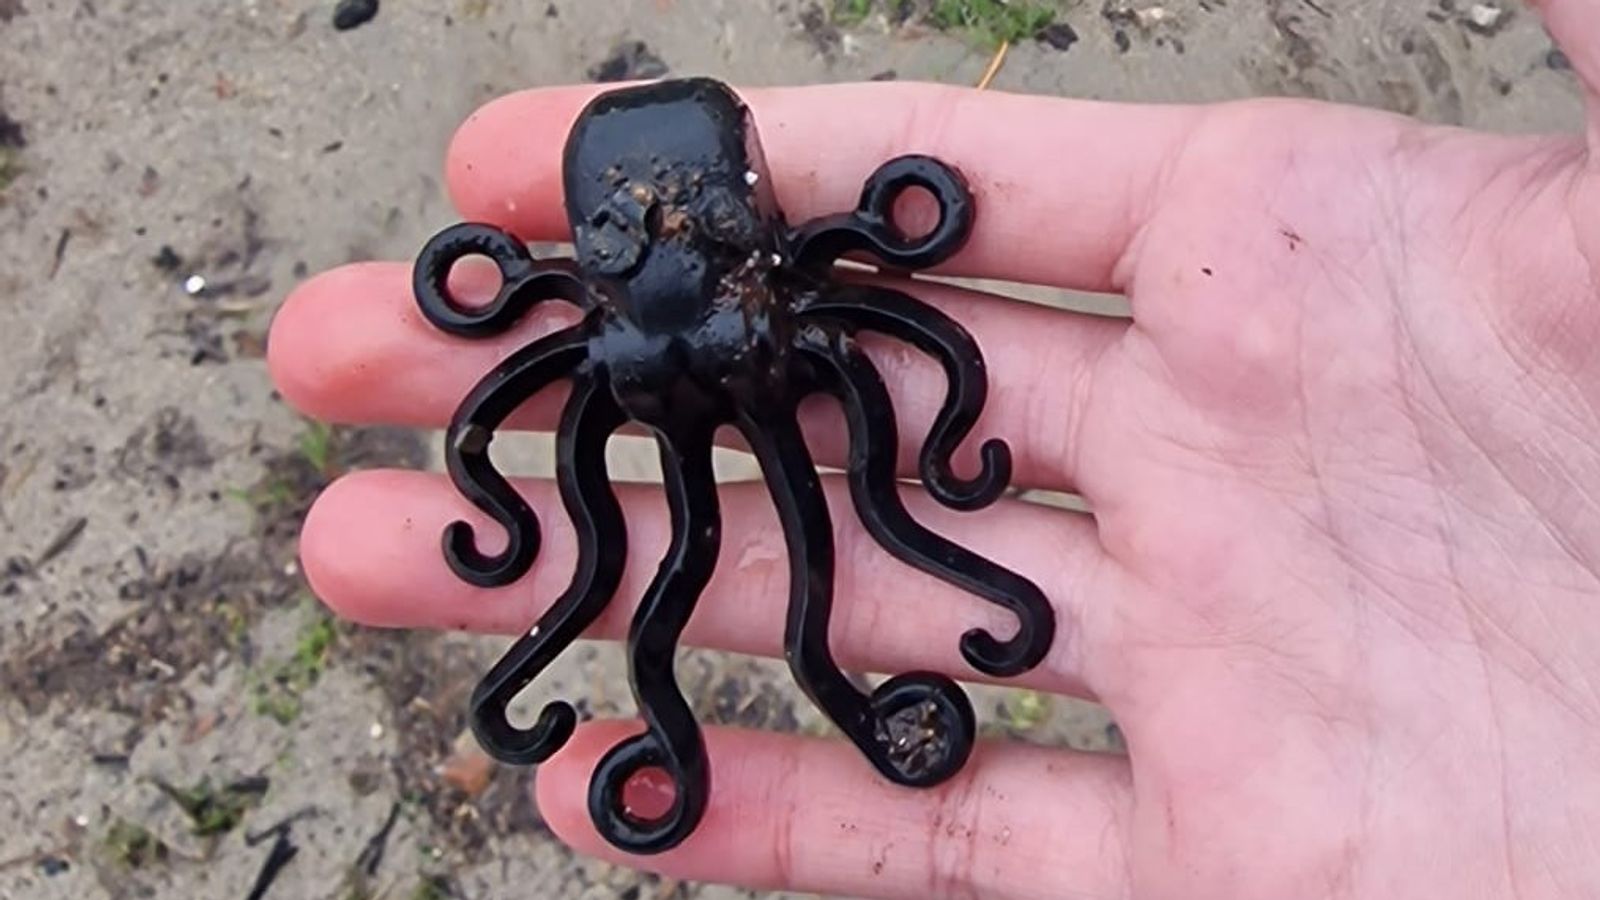 Five million Lego pieces were lost during an infamous storm in 1997, with only 4,200 octopus pieces among them - nearly three decades on, a boy's hunt